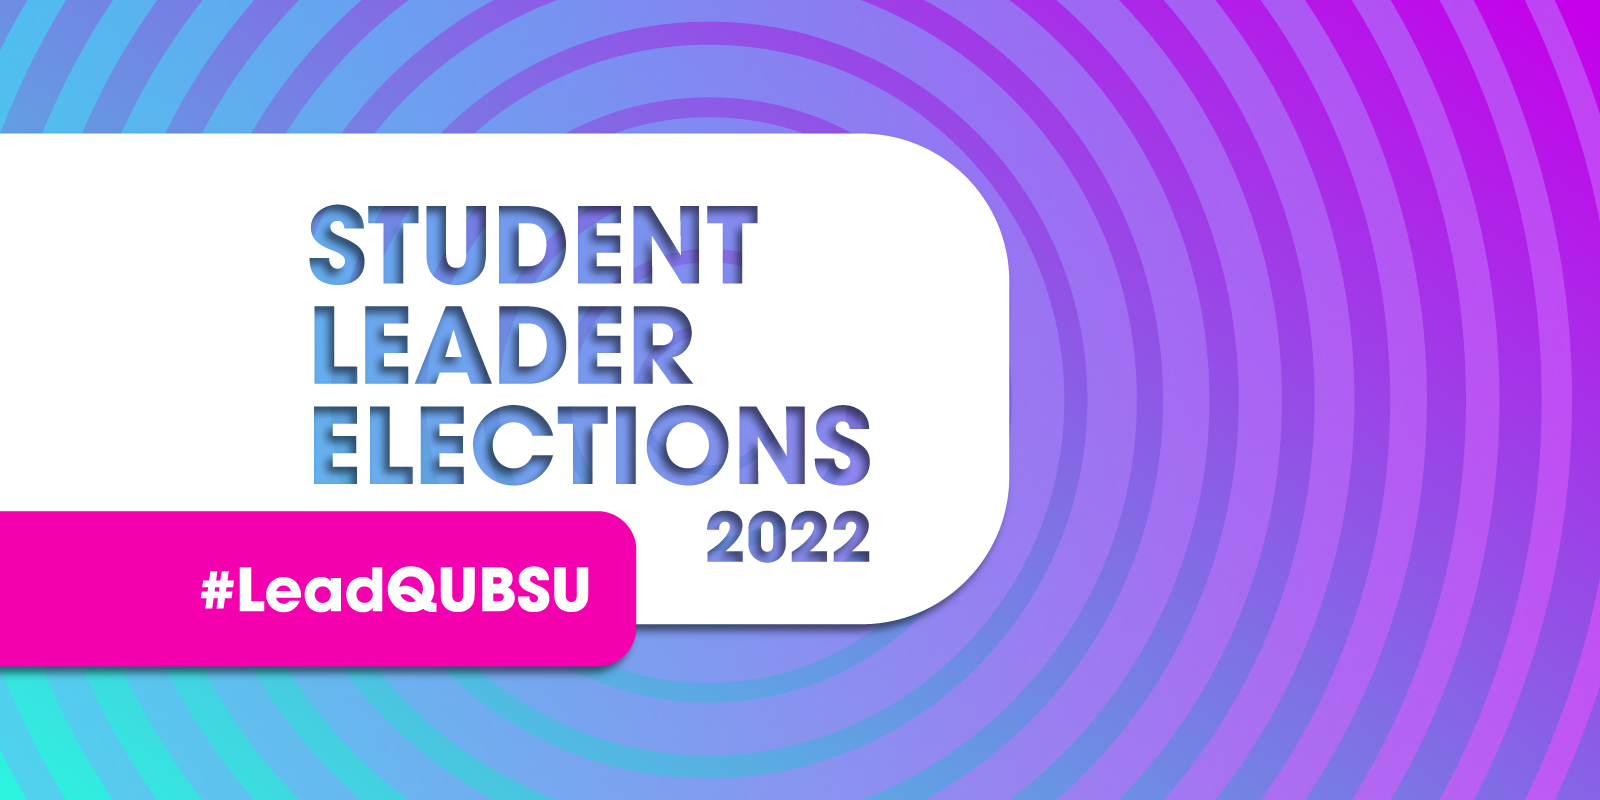 Student Leader Elections